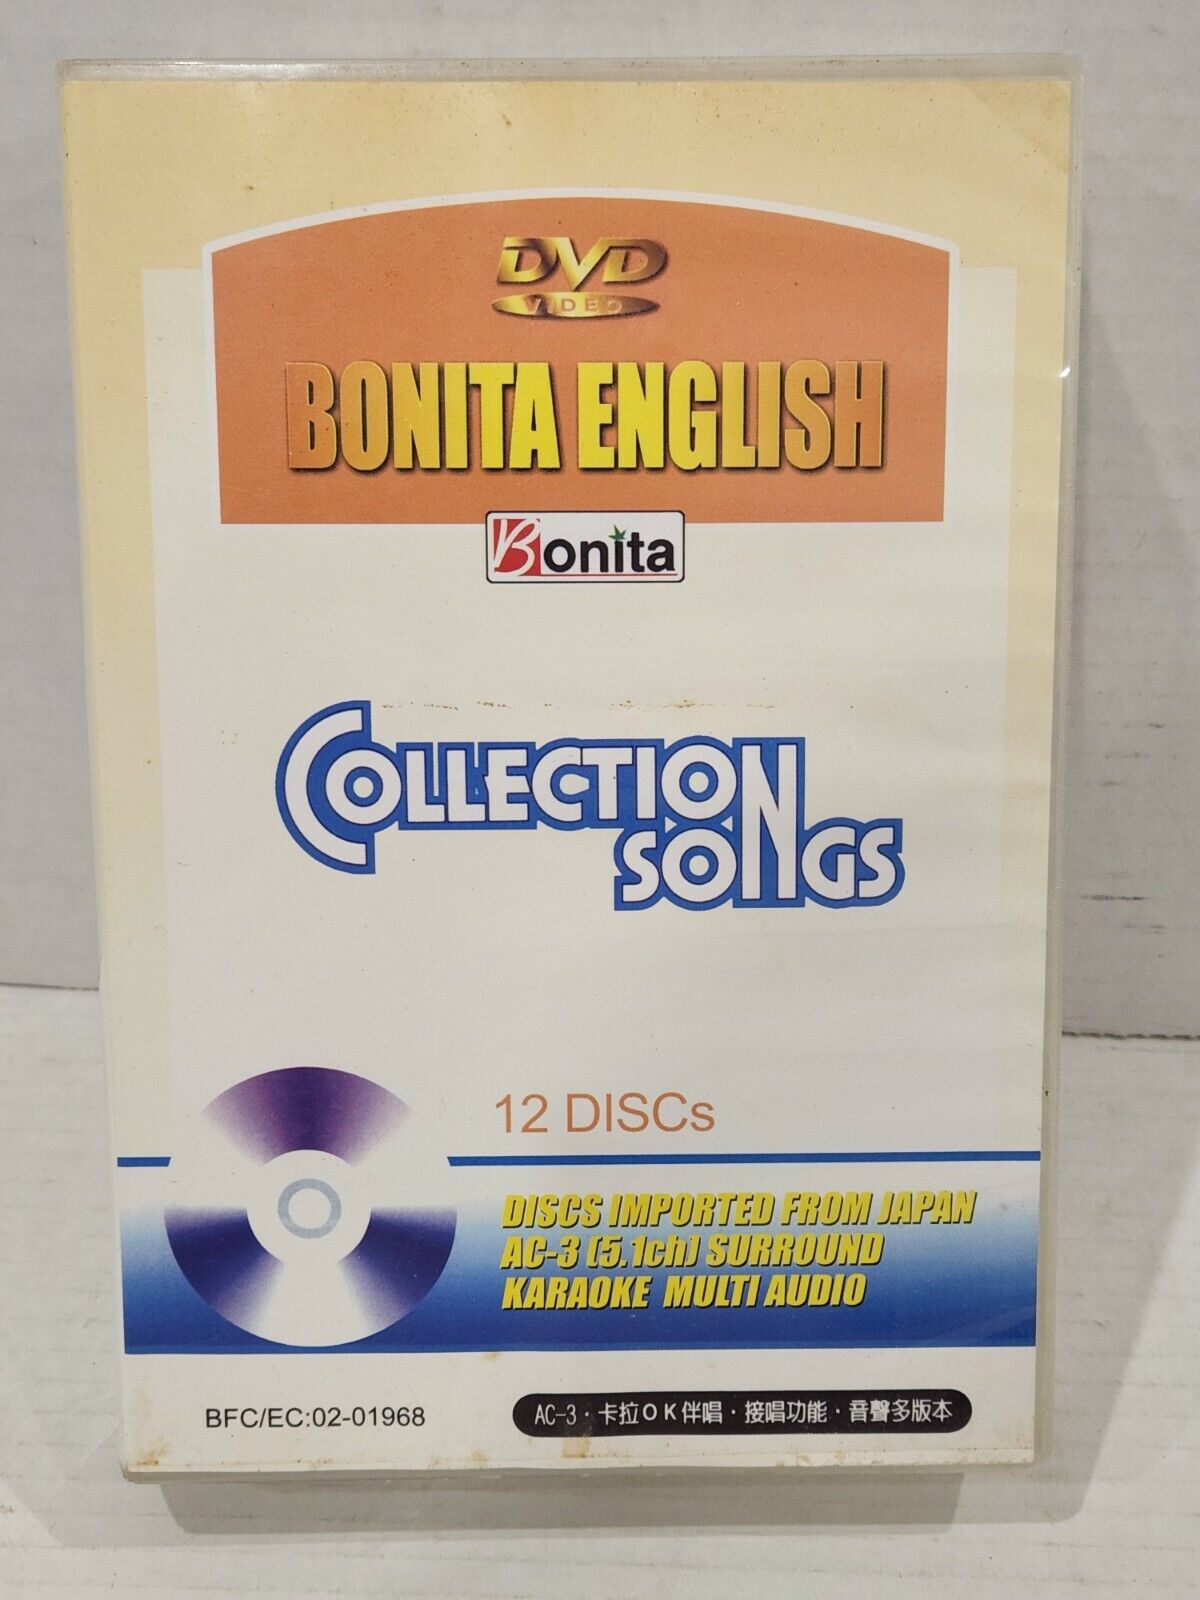 Bonita Collection of Karaoke Songs on 12 DVDs - Multi-Audio -Imported From Japan